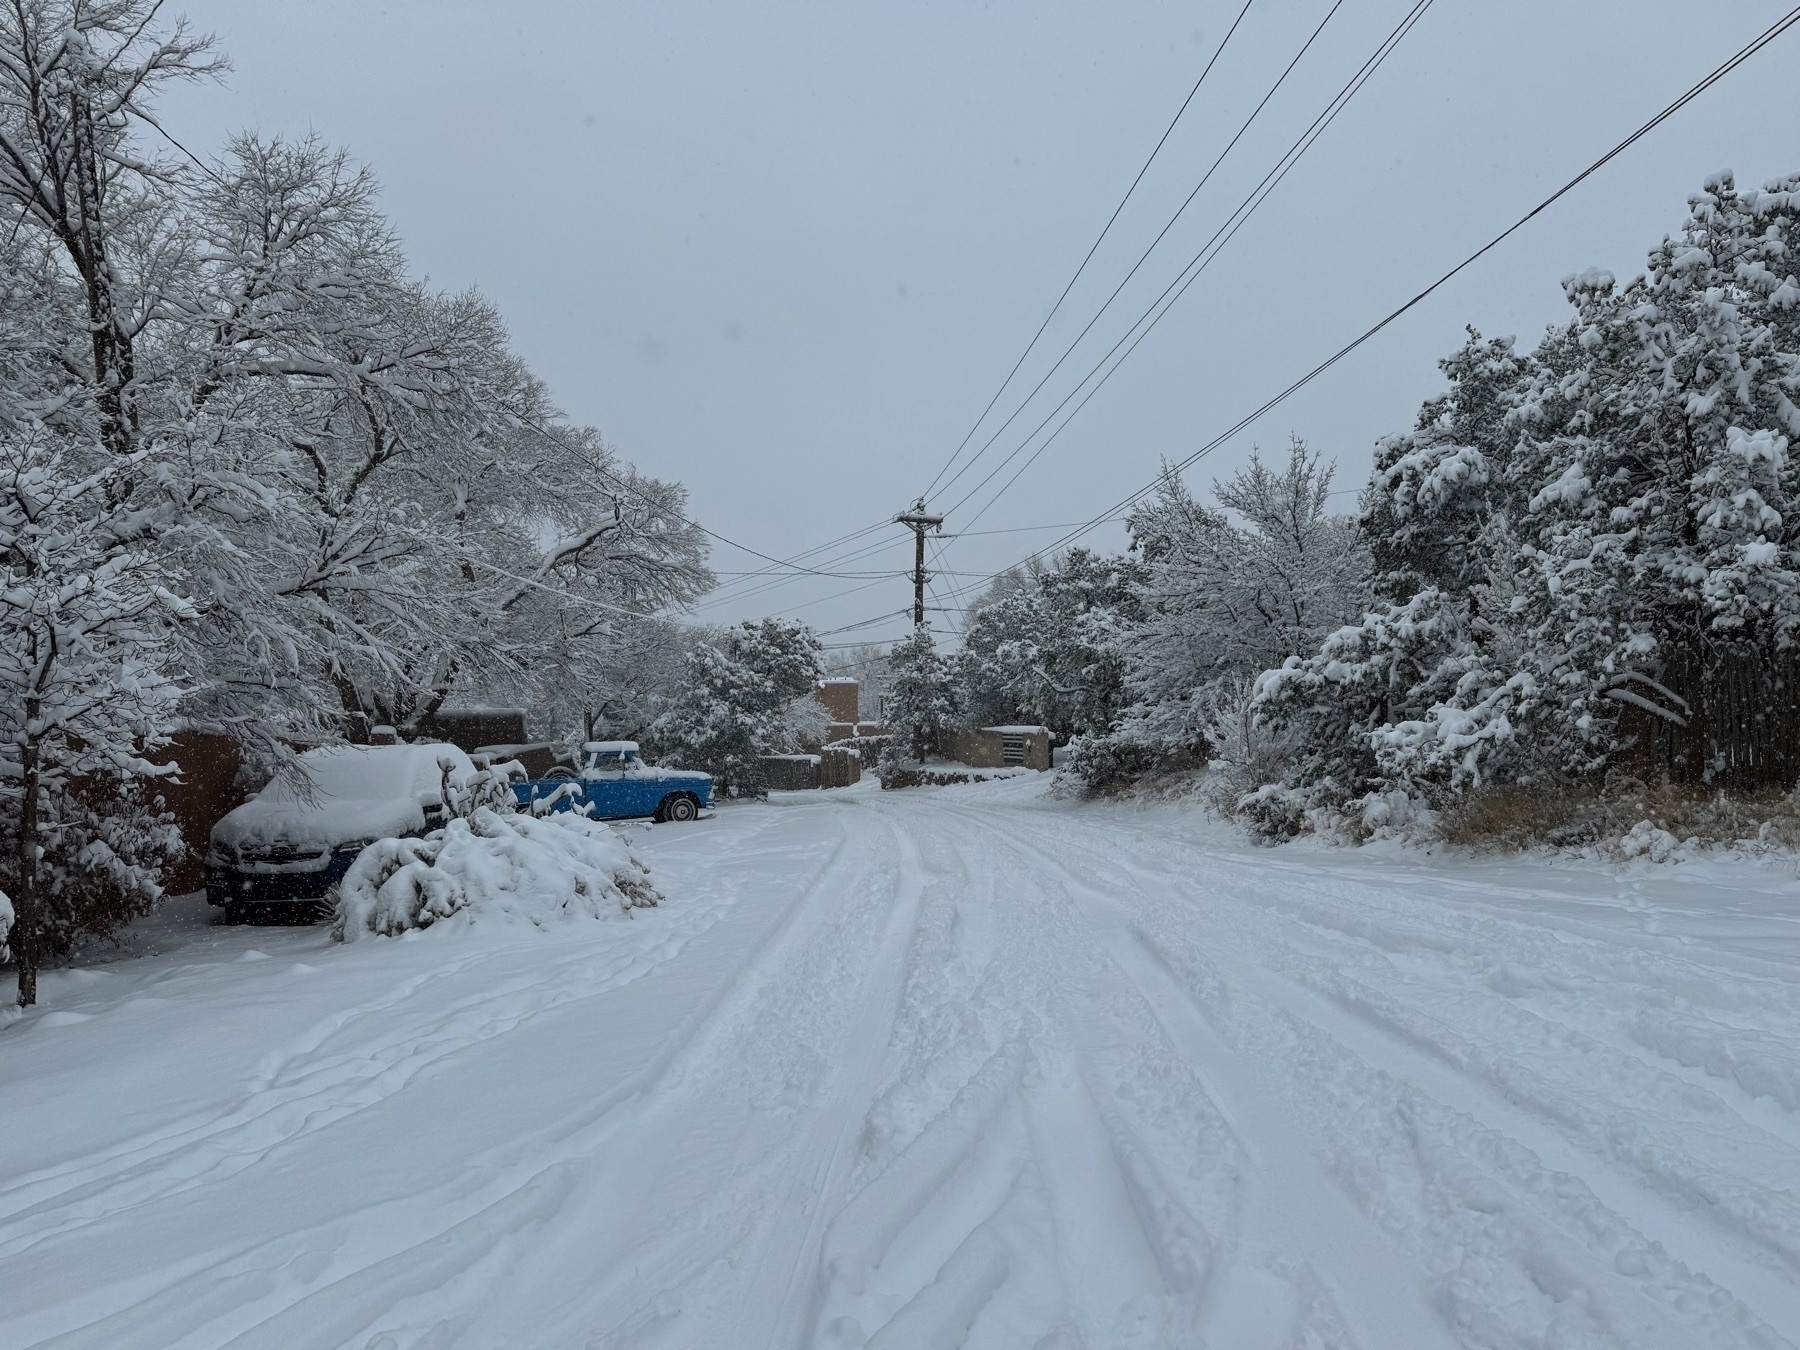 Street scene in hills above Santa Fe with deep snow covering trees and every surface including an old blue pickup truck